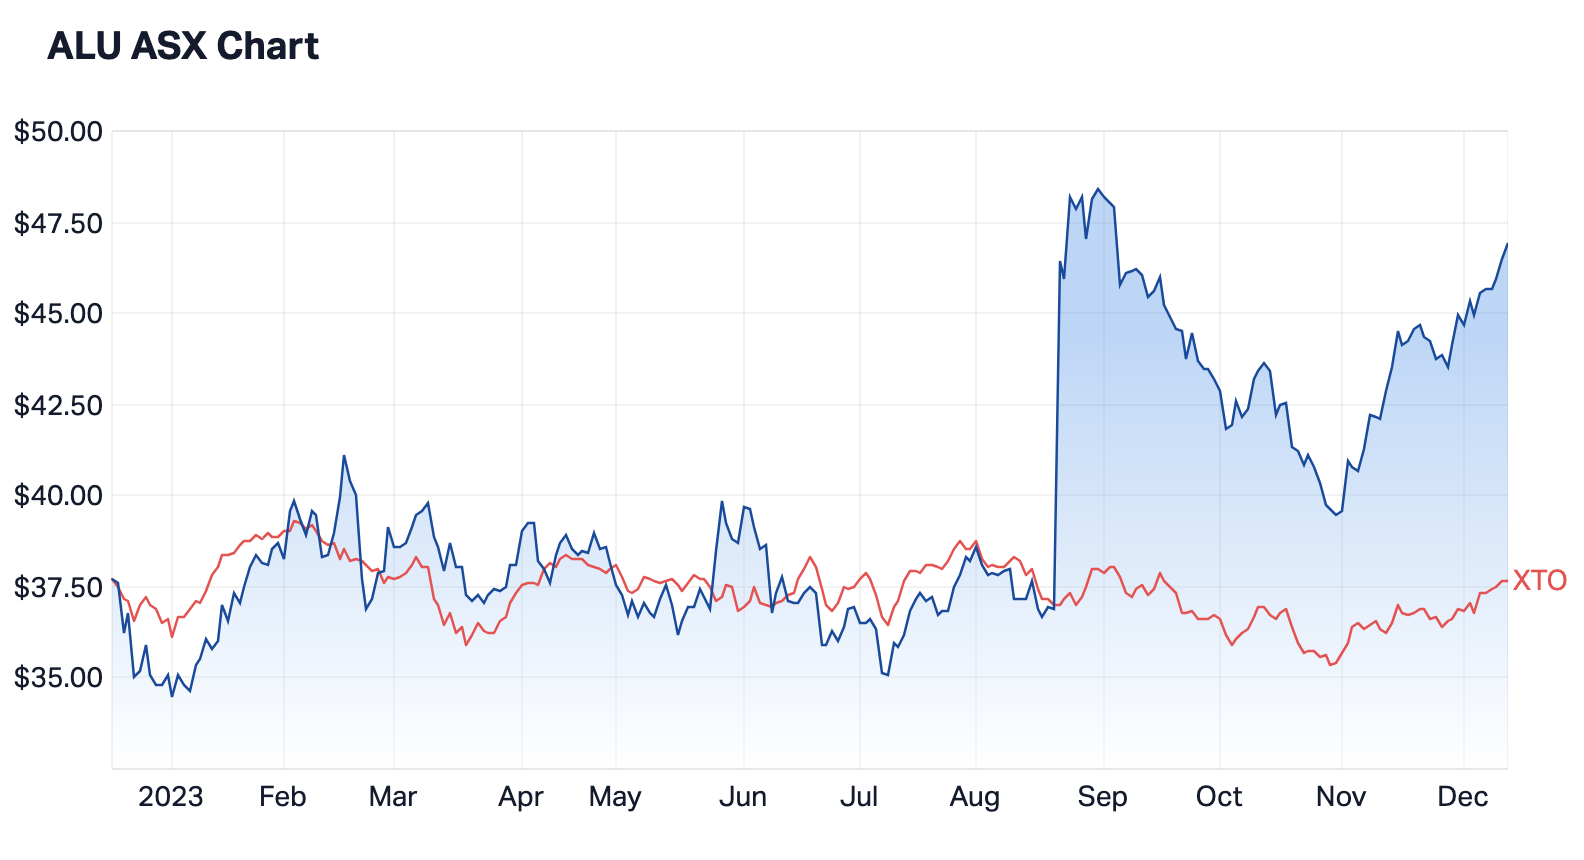 ALU shares versus the ASX 100 (as shown in red). Source: Market Index